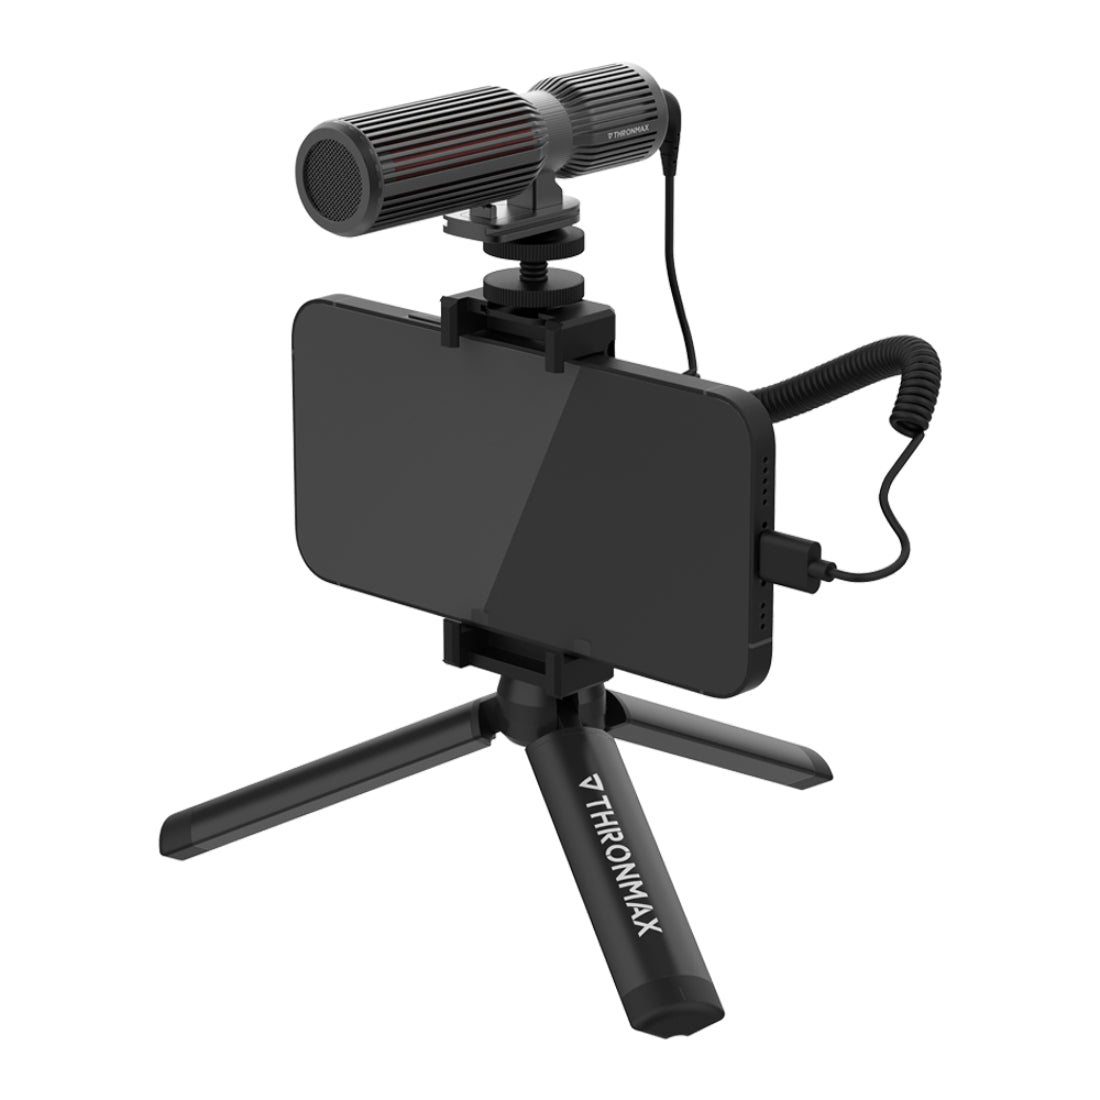 Thronmax C1 StreamMic Vlogger Kit for Cameras, Smartphones, and USB Type-C Devices - Store 974 | ستور ٩٧٤